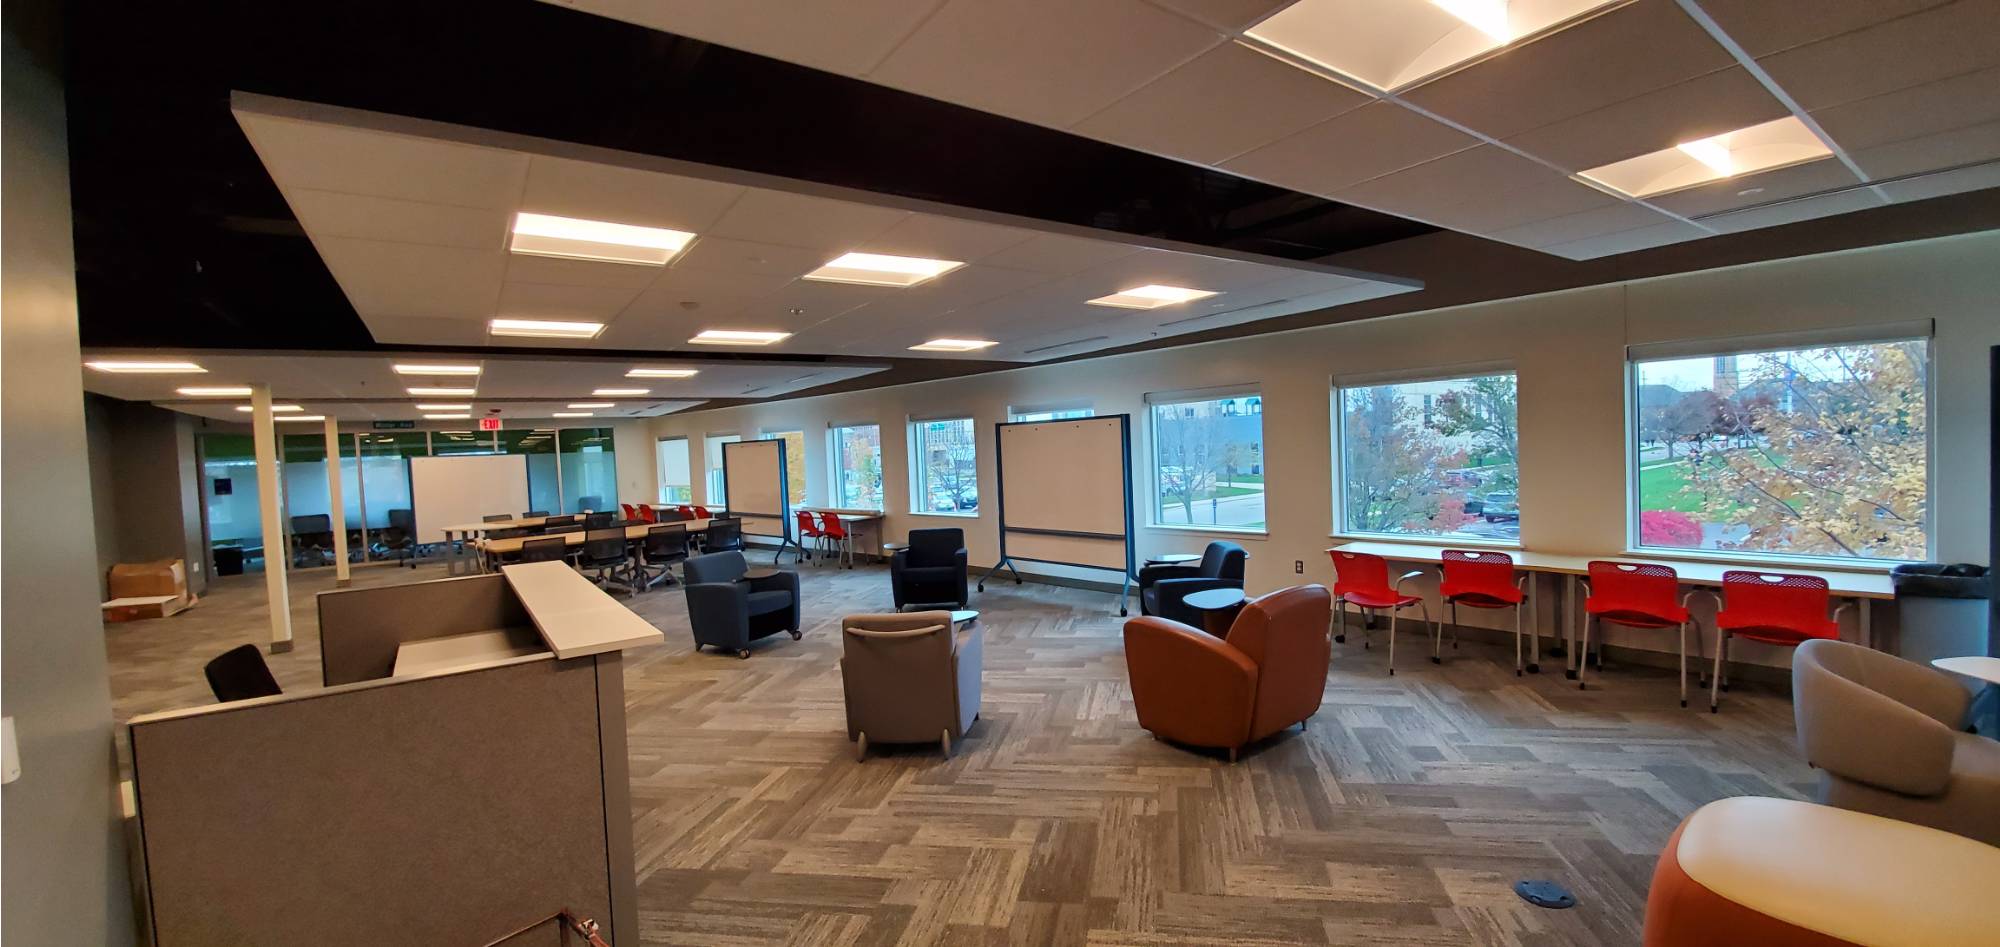 Open Collaboration Spaces with whiteboards and moveable chairs